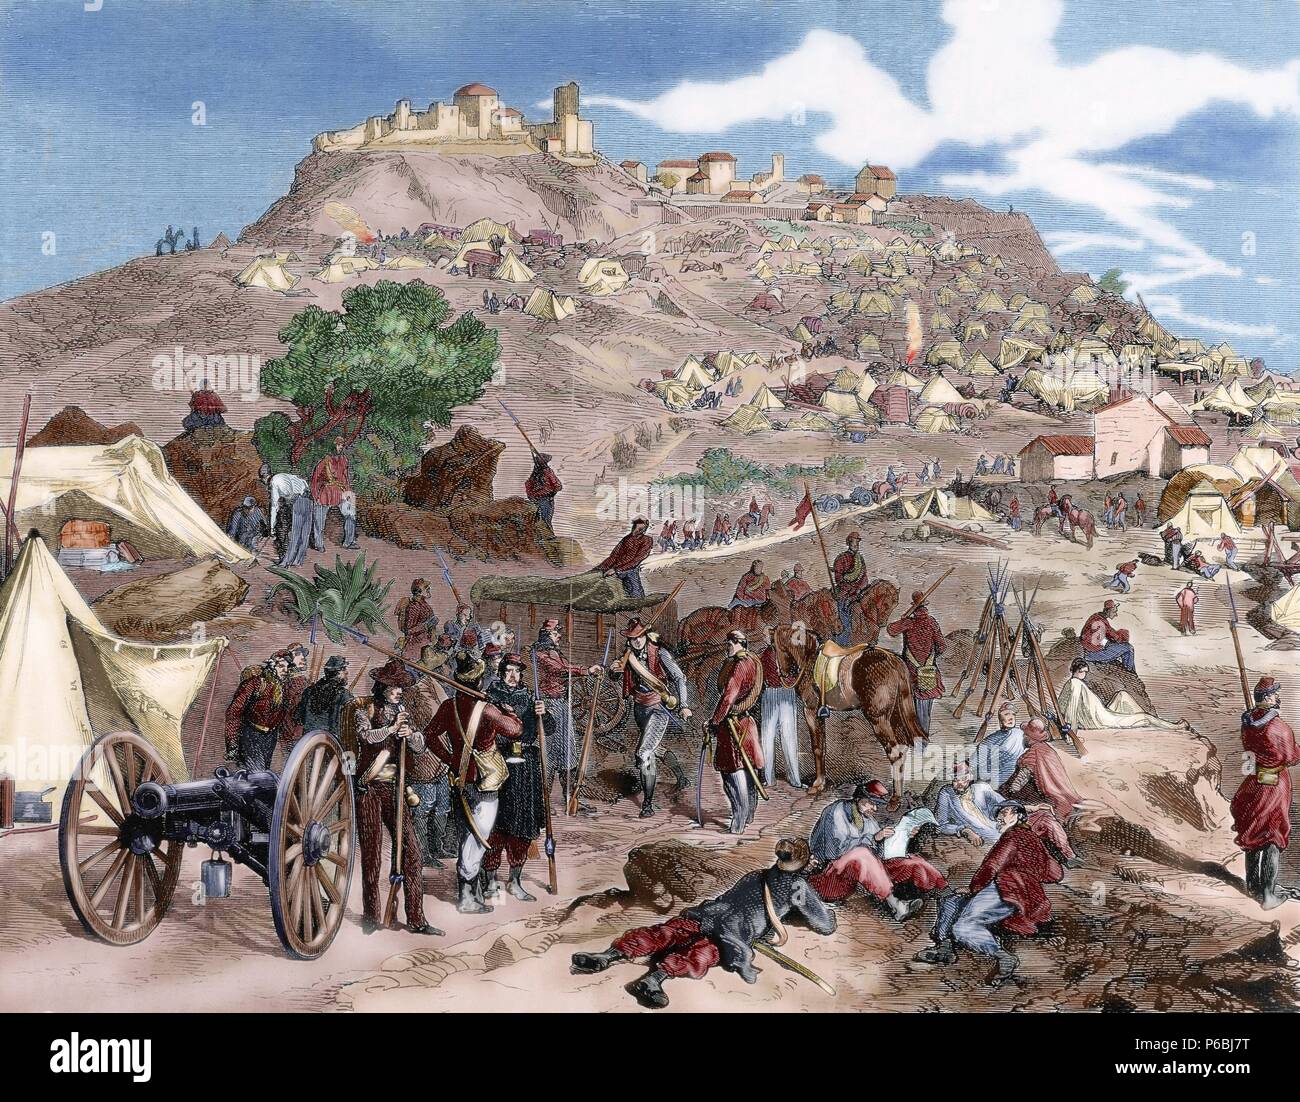 Italian unification (1859-1924). Conquest of Sicily (1860). Garibaldi goes to Palermo with the thousand volunteers called Redshirts. Camp of the troops of Garibaldi in Castrogiovanni. Engraving in 'L'Illustration (1860) by M. Sutter. Colored. Stock Photo